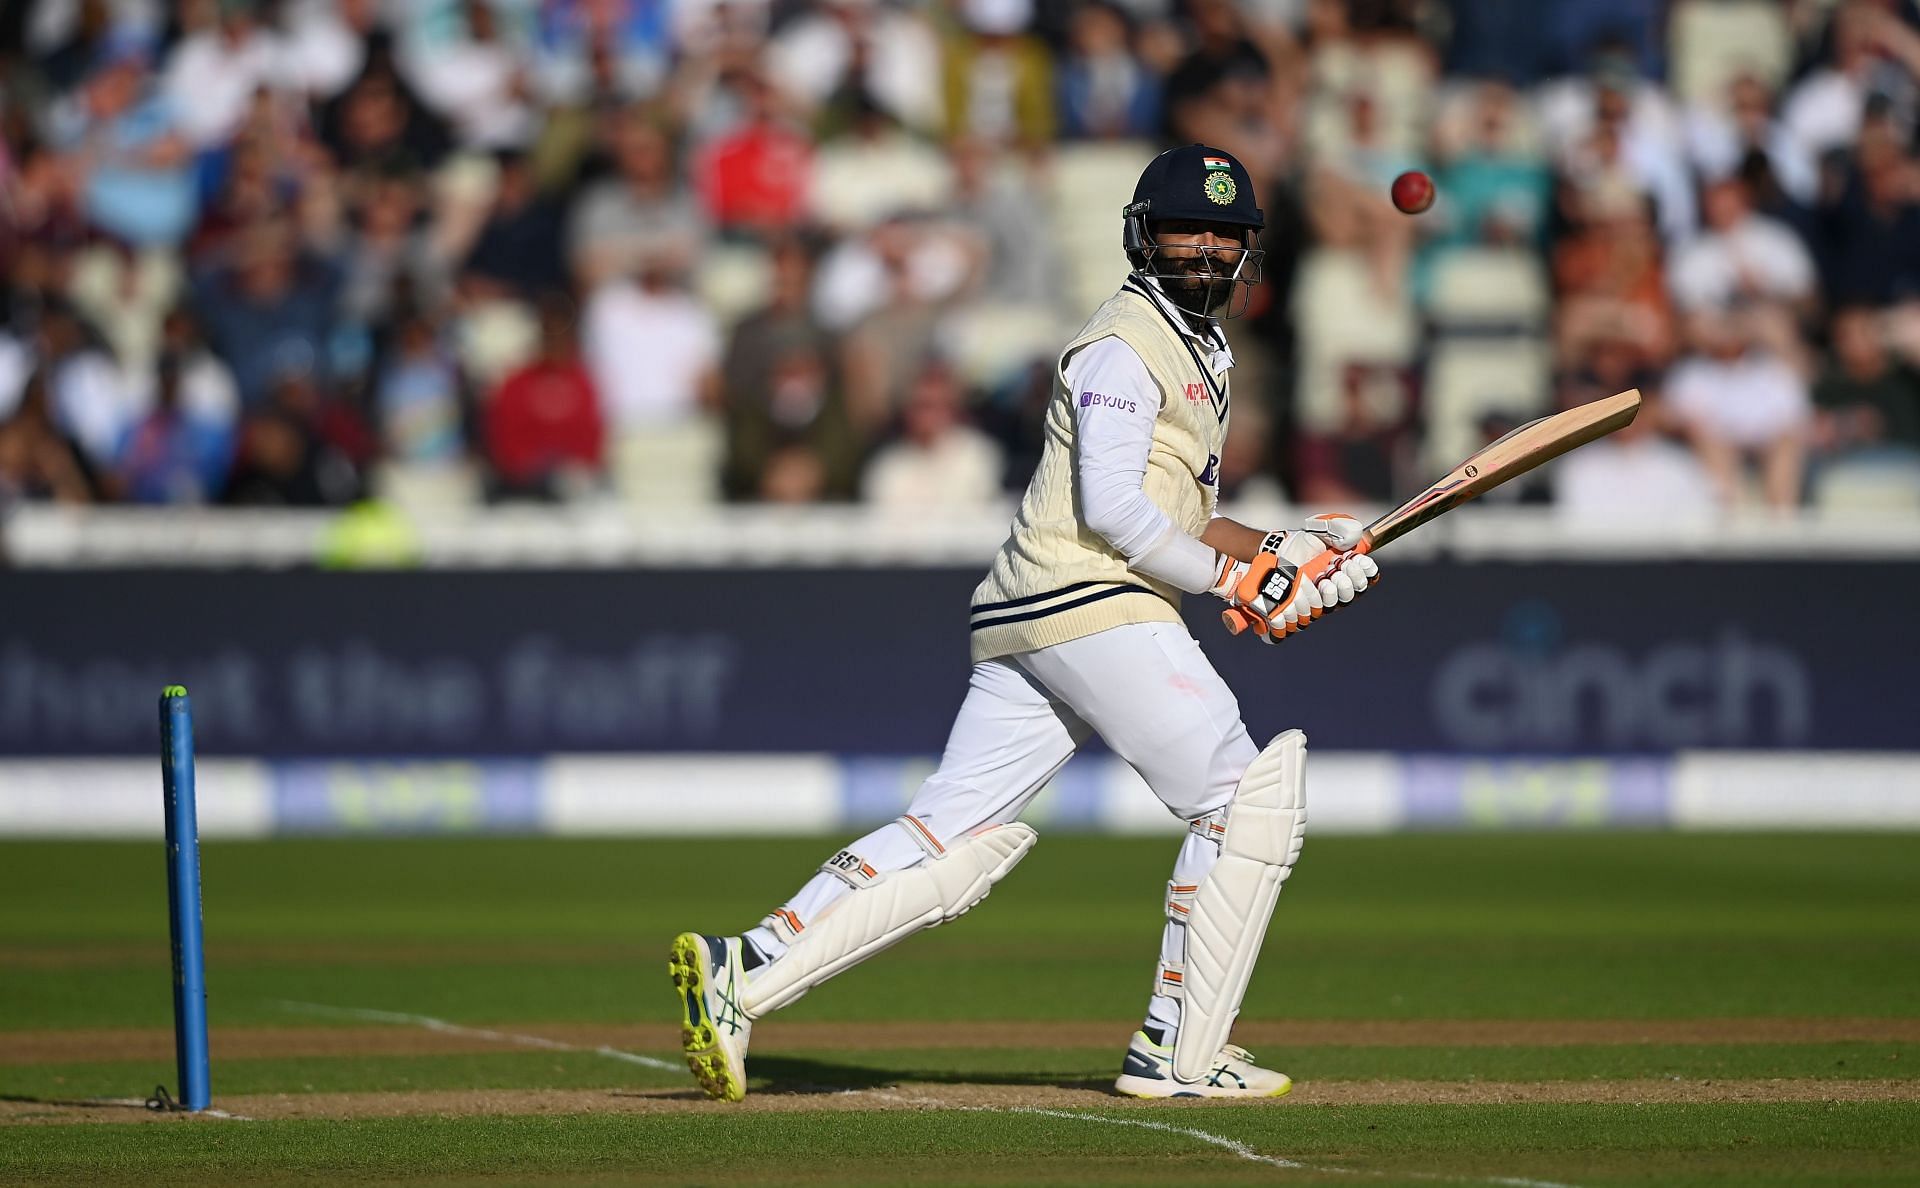 England v India - Fifth LV= Insurance Test Match: Day One